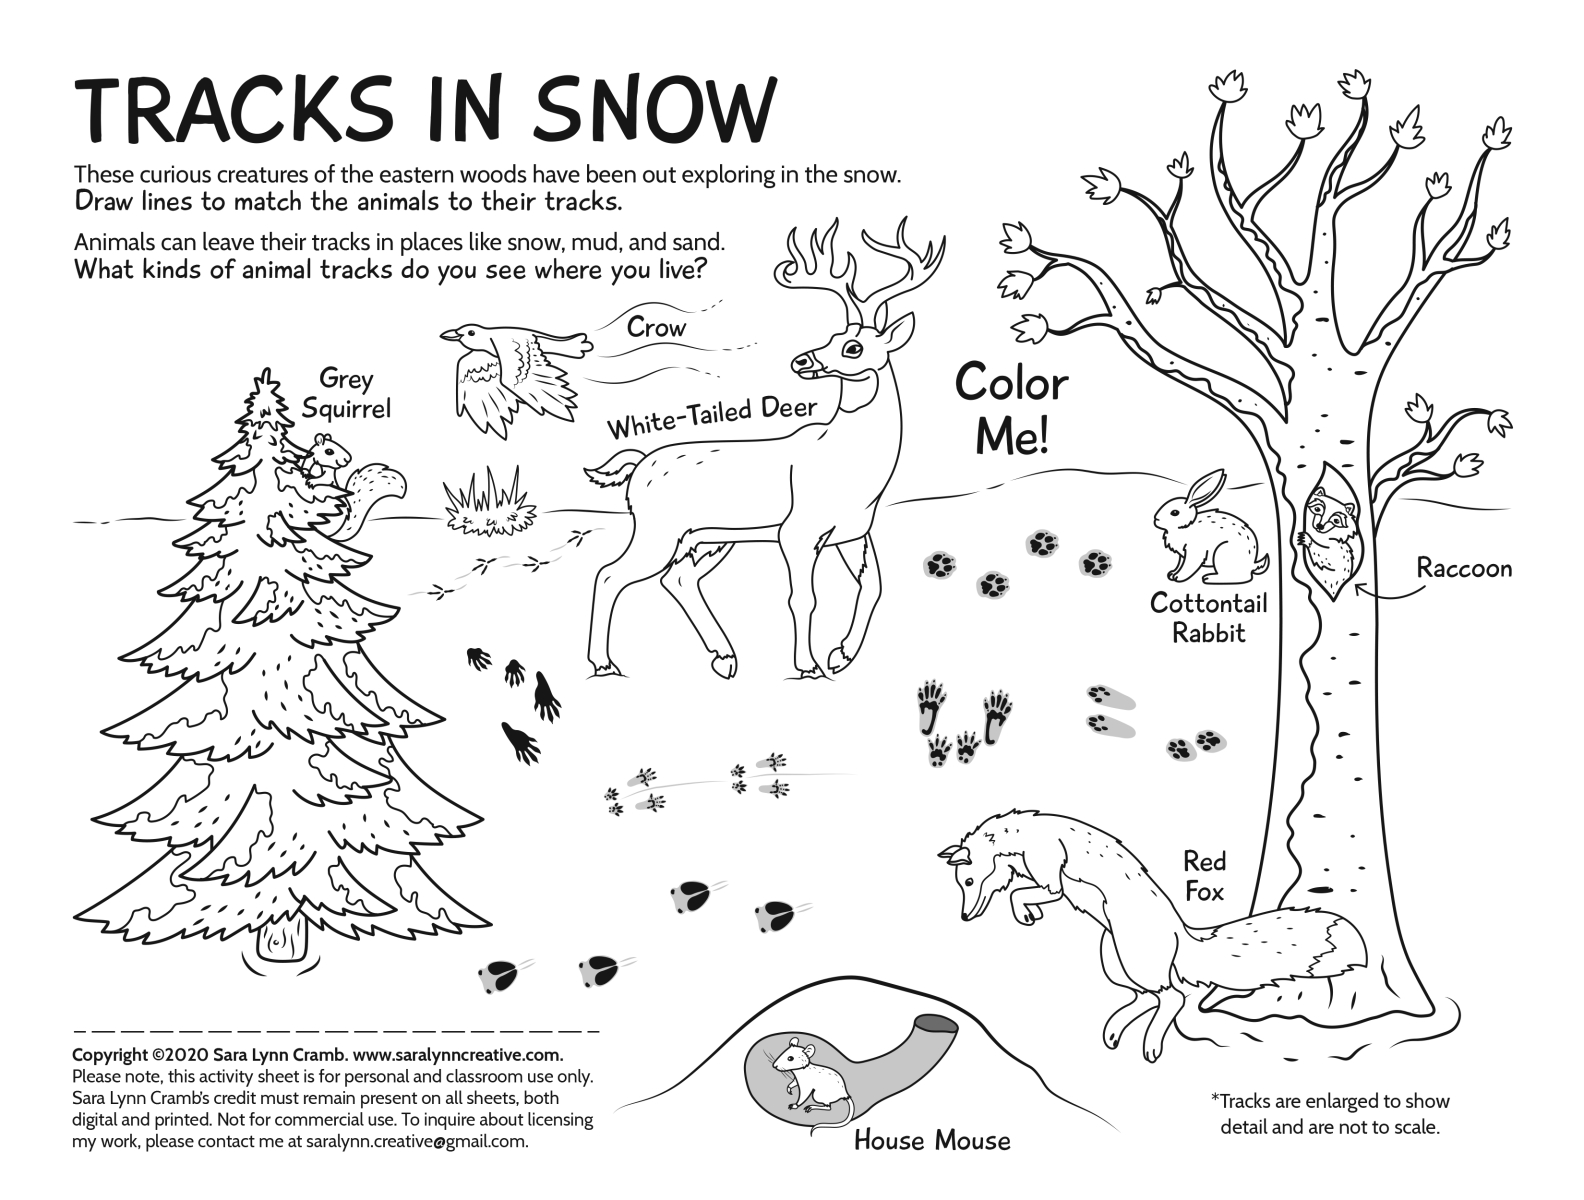 Tracks in Snow coloring page by Sara Lynn Cramb on Dribbble